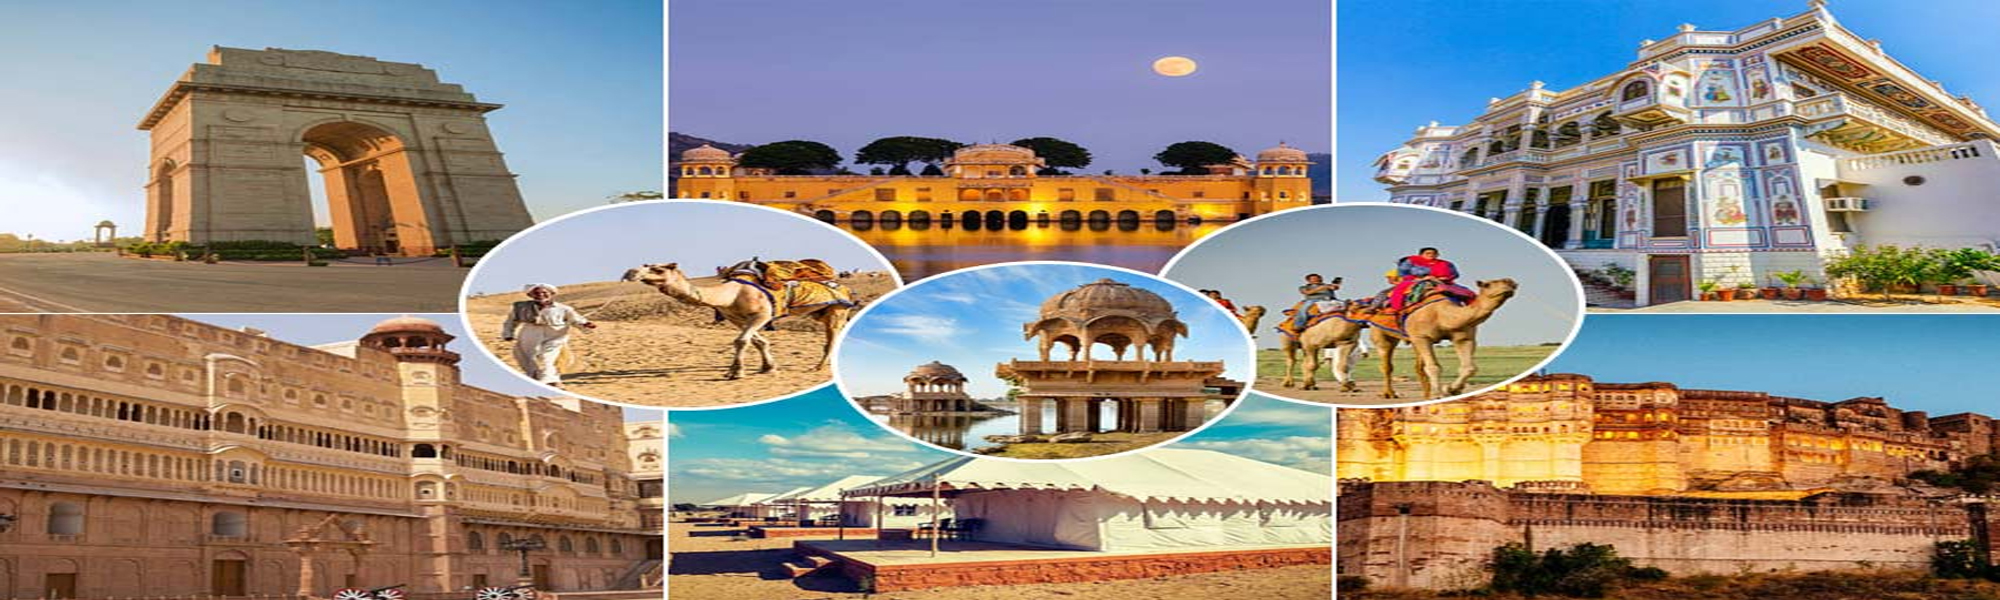 Camel Safari Tours in India with Heritage Haveli Tours in India